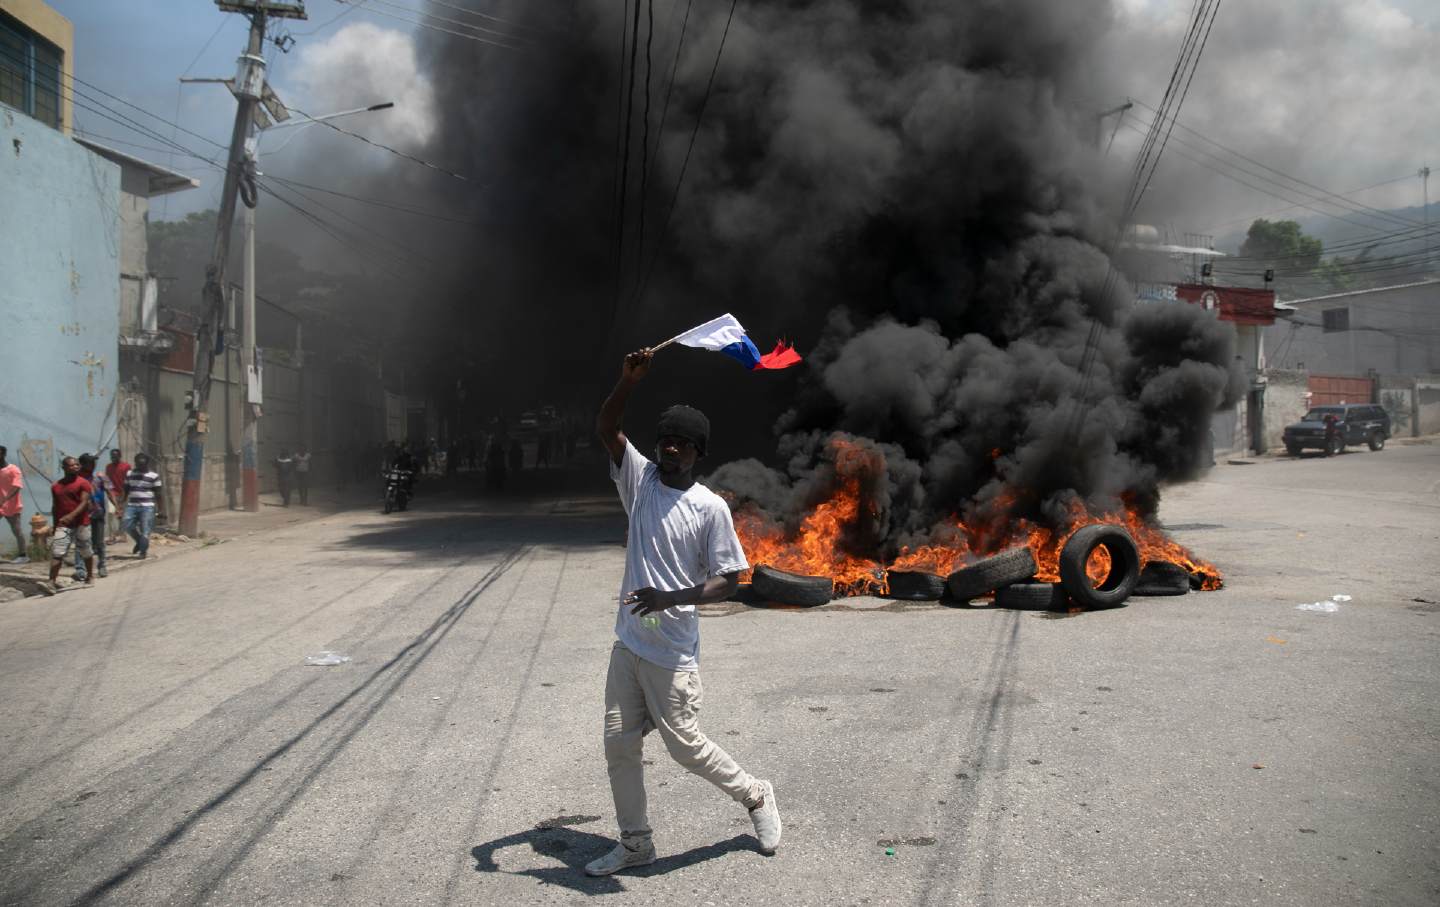 A man waves a Russian national flag next to a burning barricade protesting Haitian Prime Minister Ariel Henry.